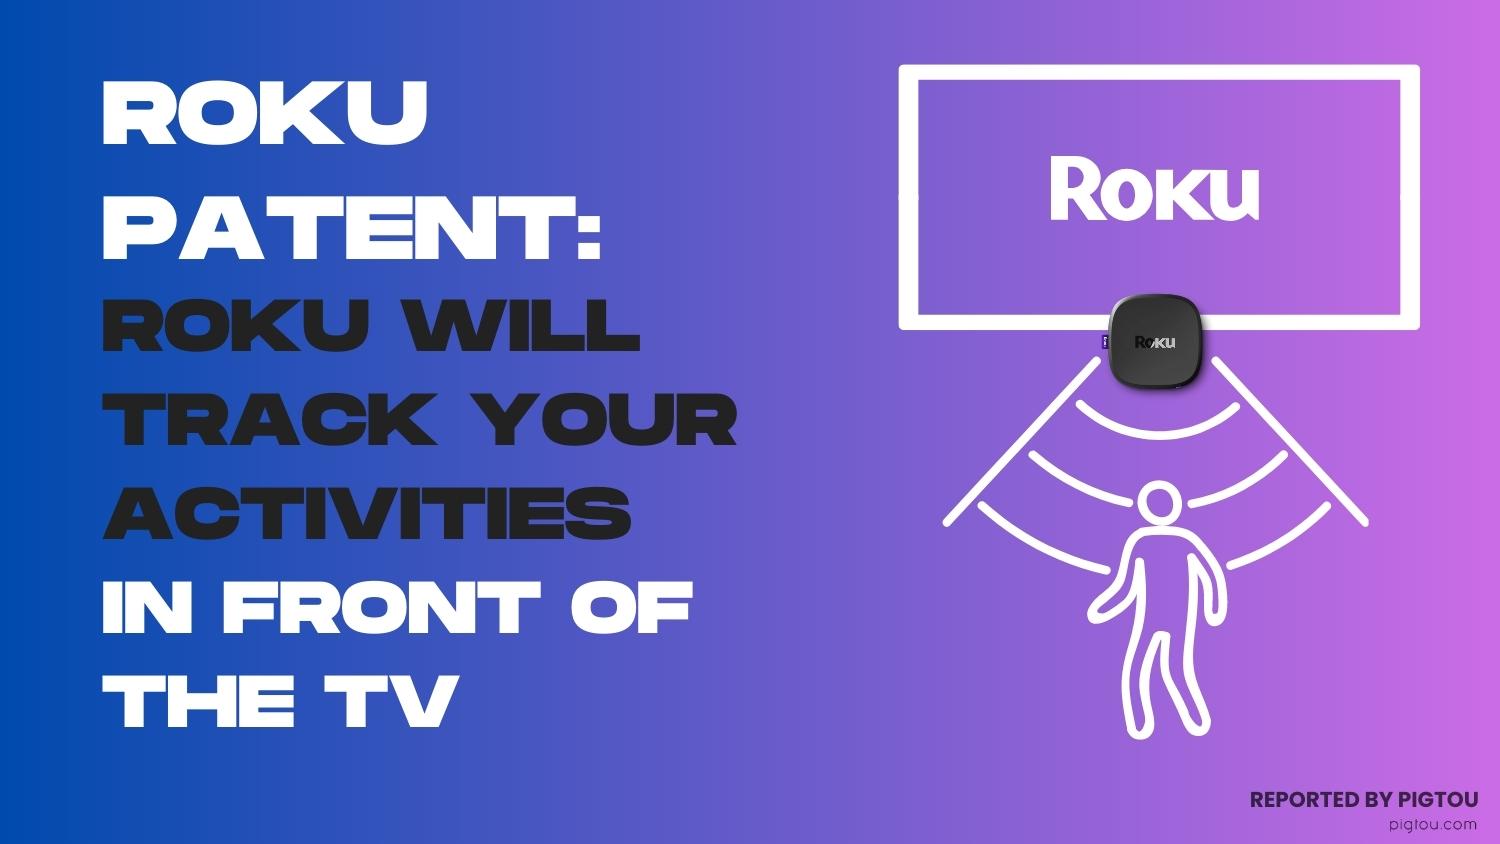 Roku Patent Roku Will Track Your Activities in Front of the TV